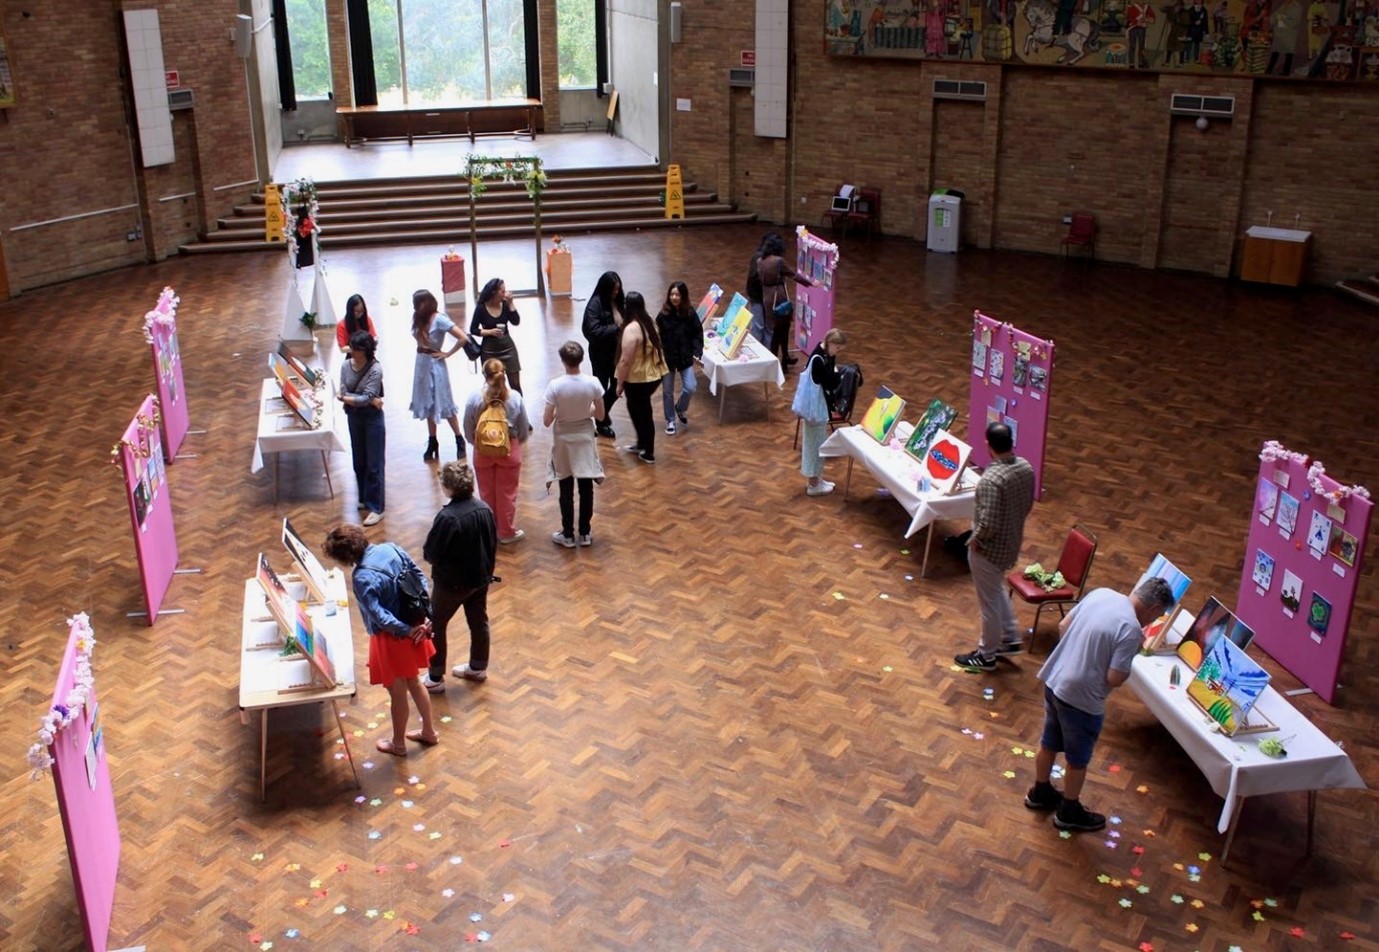 Wide-view photo of art exhibition in a hall with visitors.